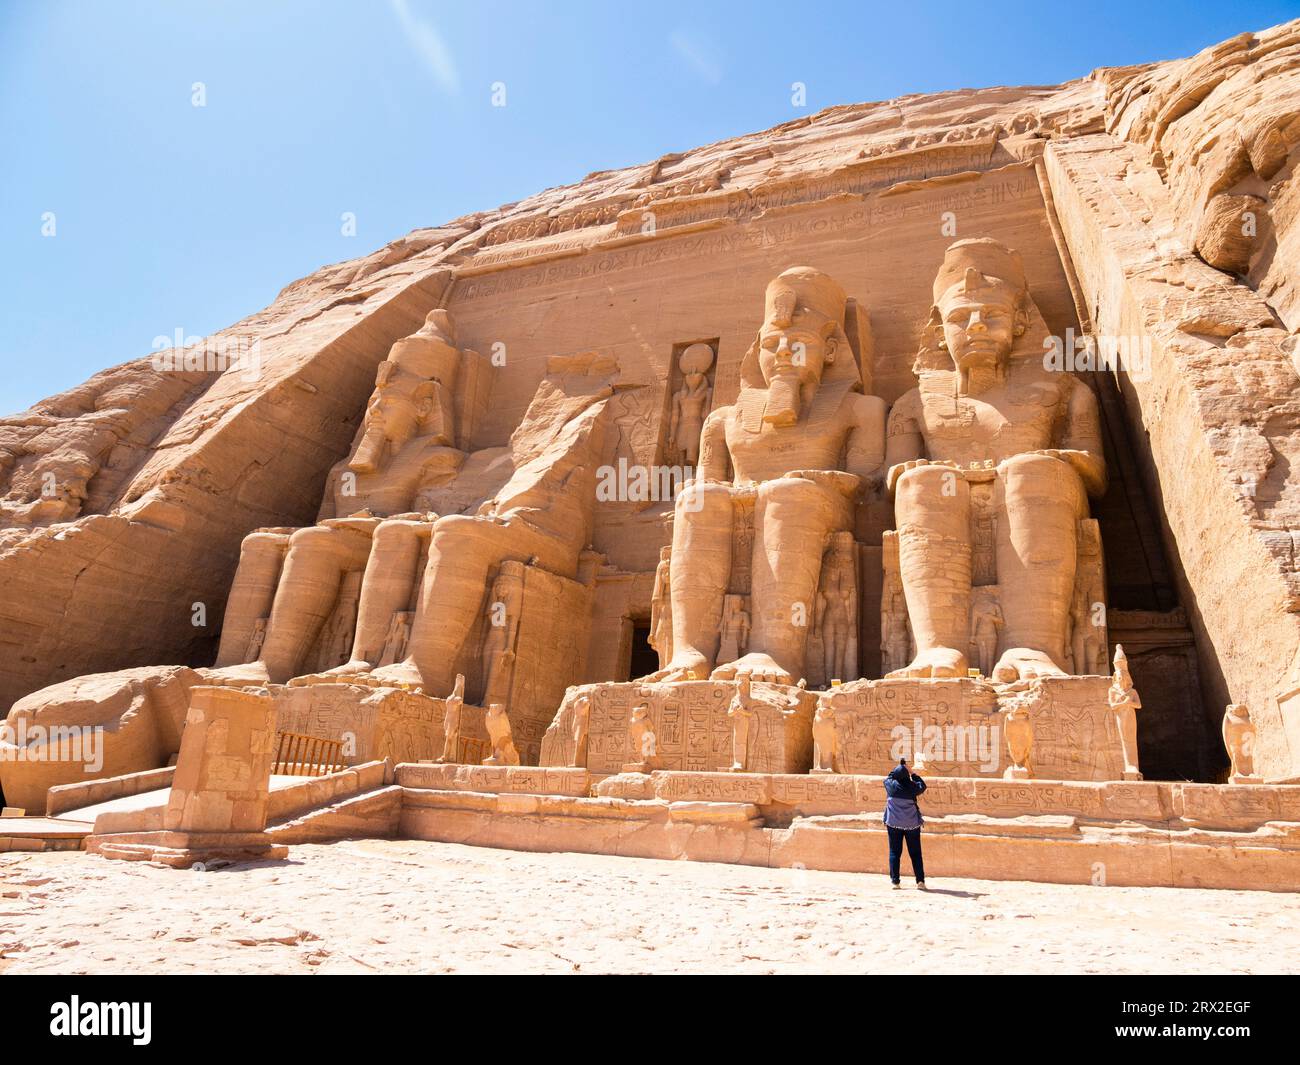 The Great Temple of Abu Simbel with its four iconic 20 meter tall seated colossal statues of Ramses II (Ramses The Great), Abu Simbel, Egypt Stock Photo